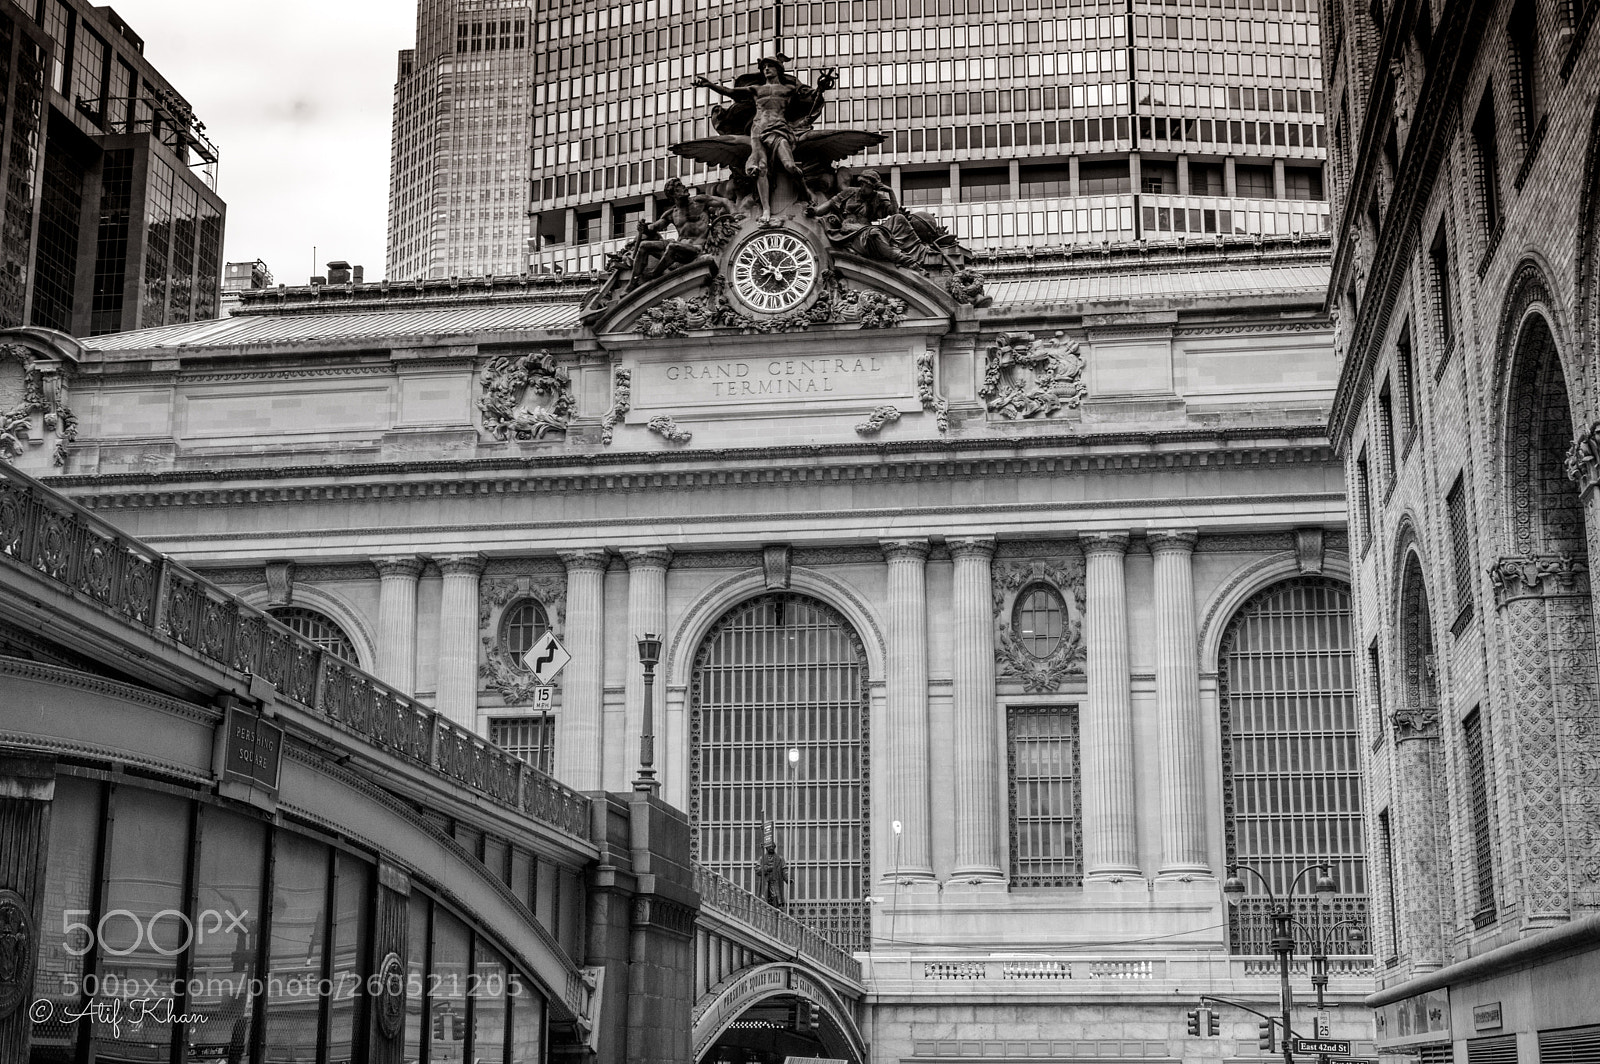 Pentax K-3 sample photo. Grand central terminal photography